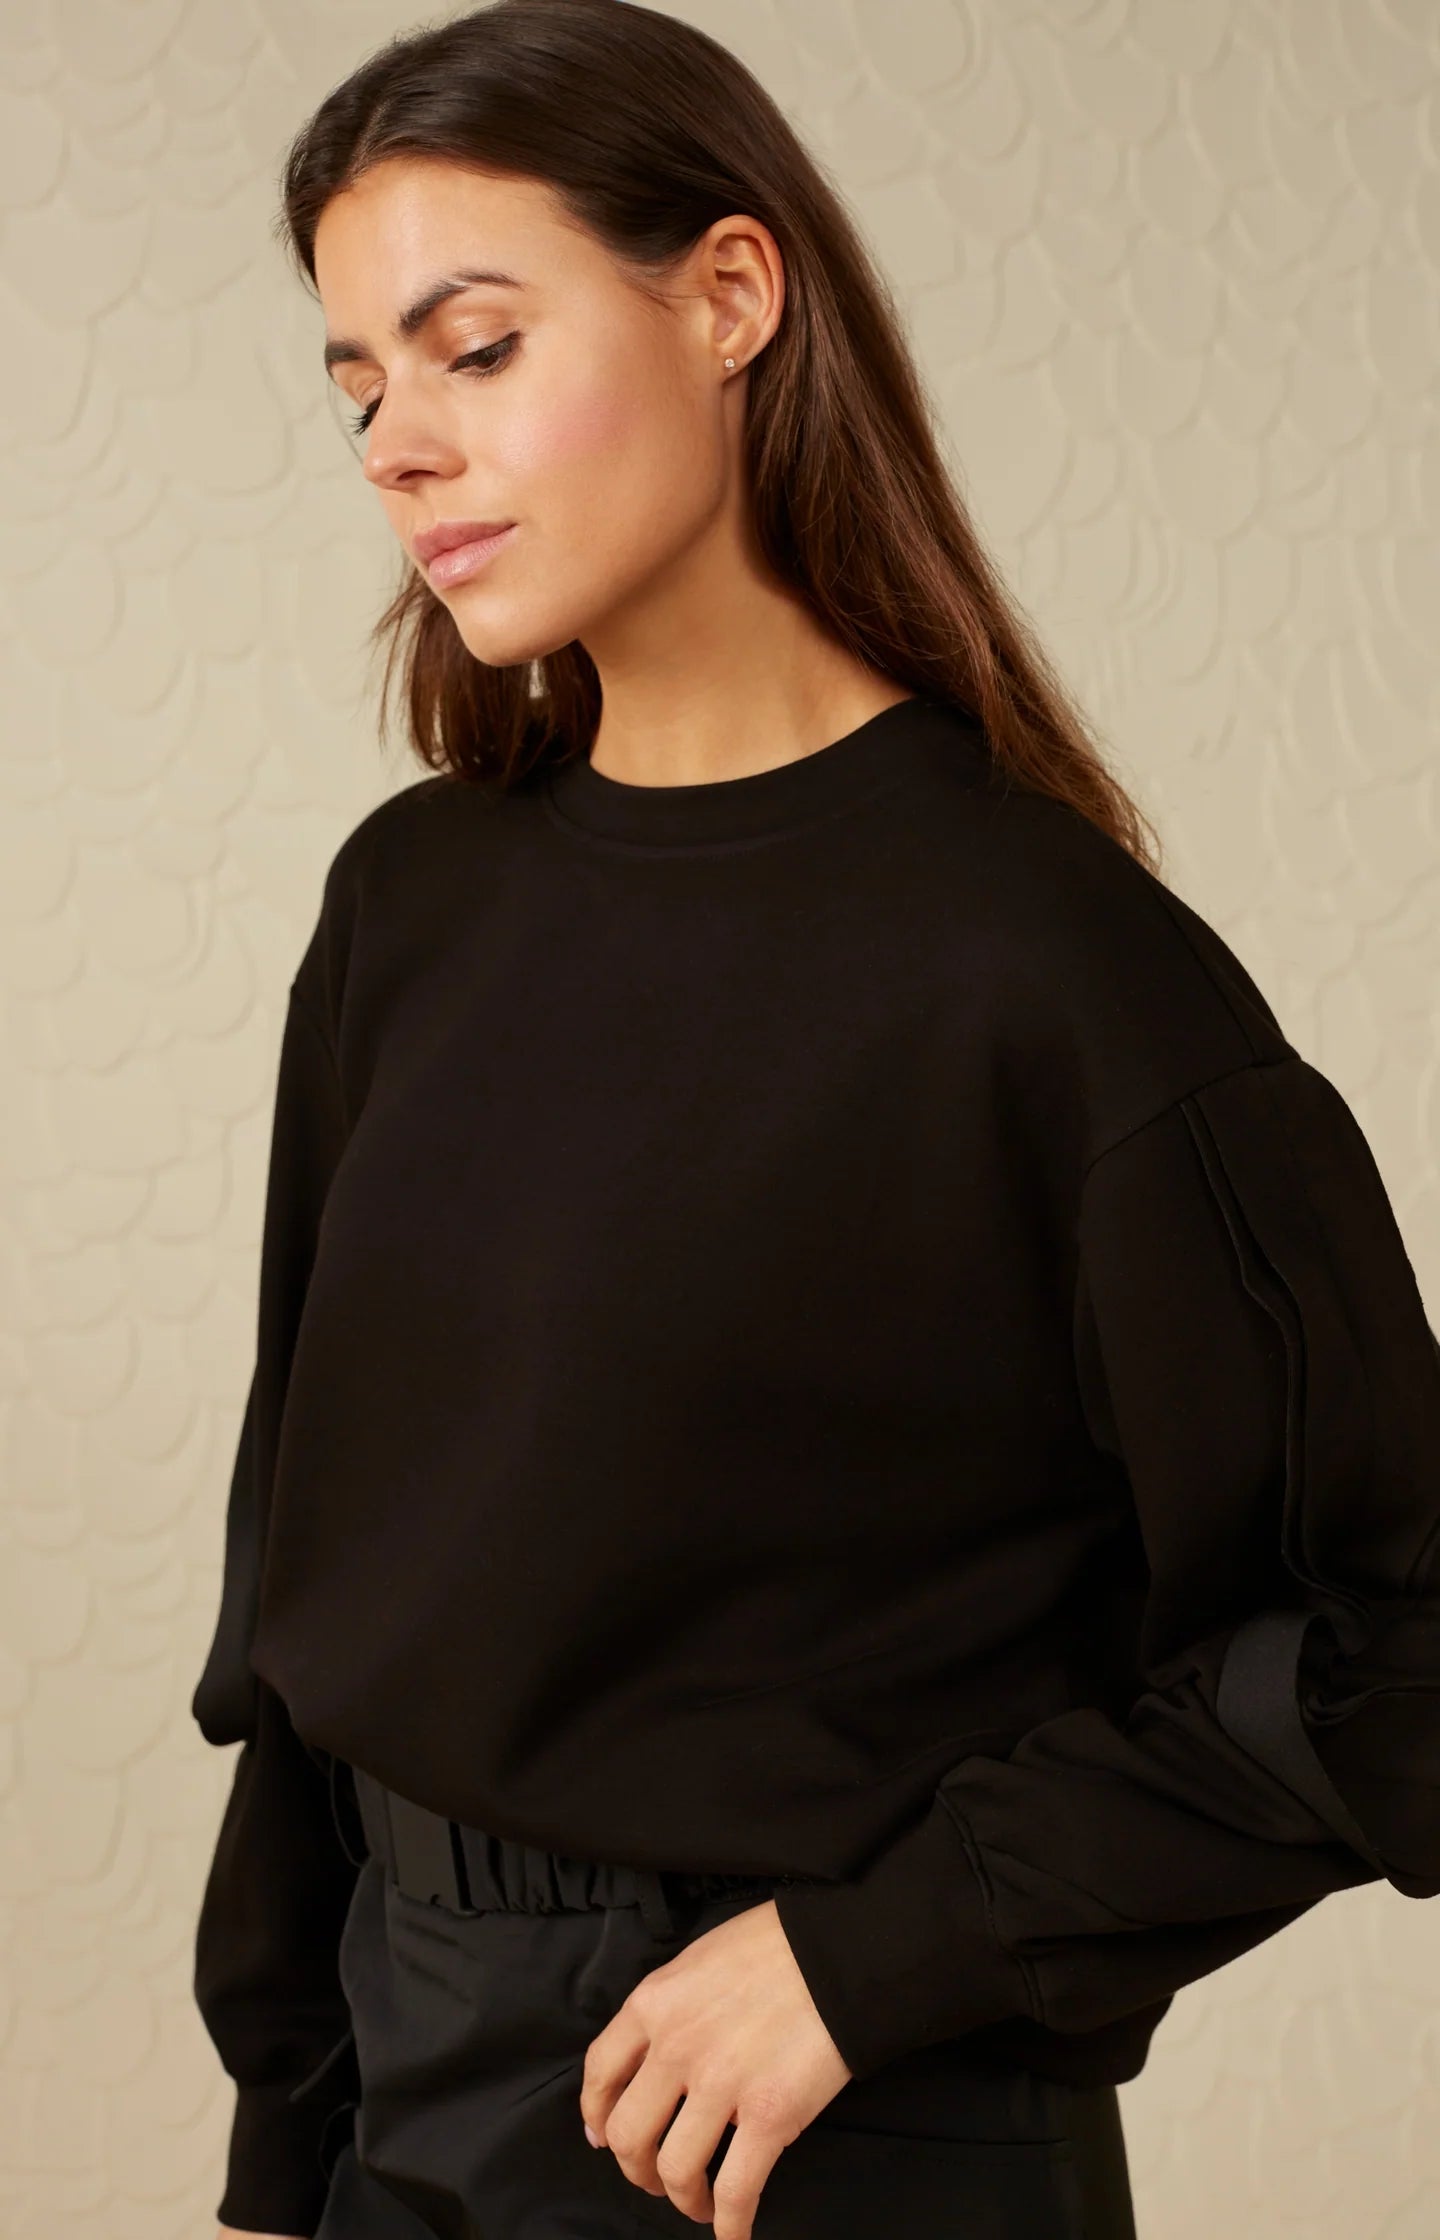 Sweatshirt with crewneck, puff sleeves and ruffle detail